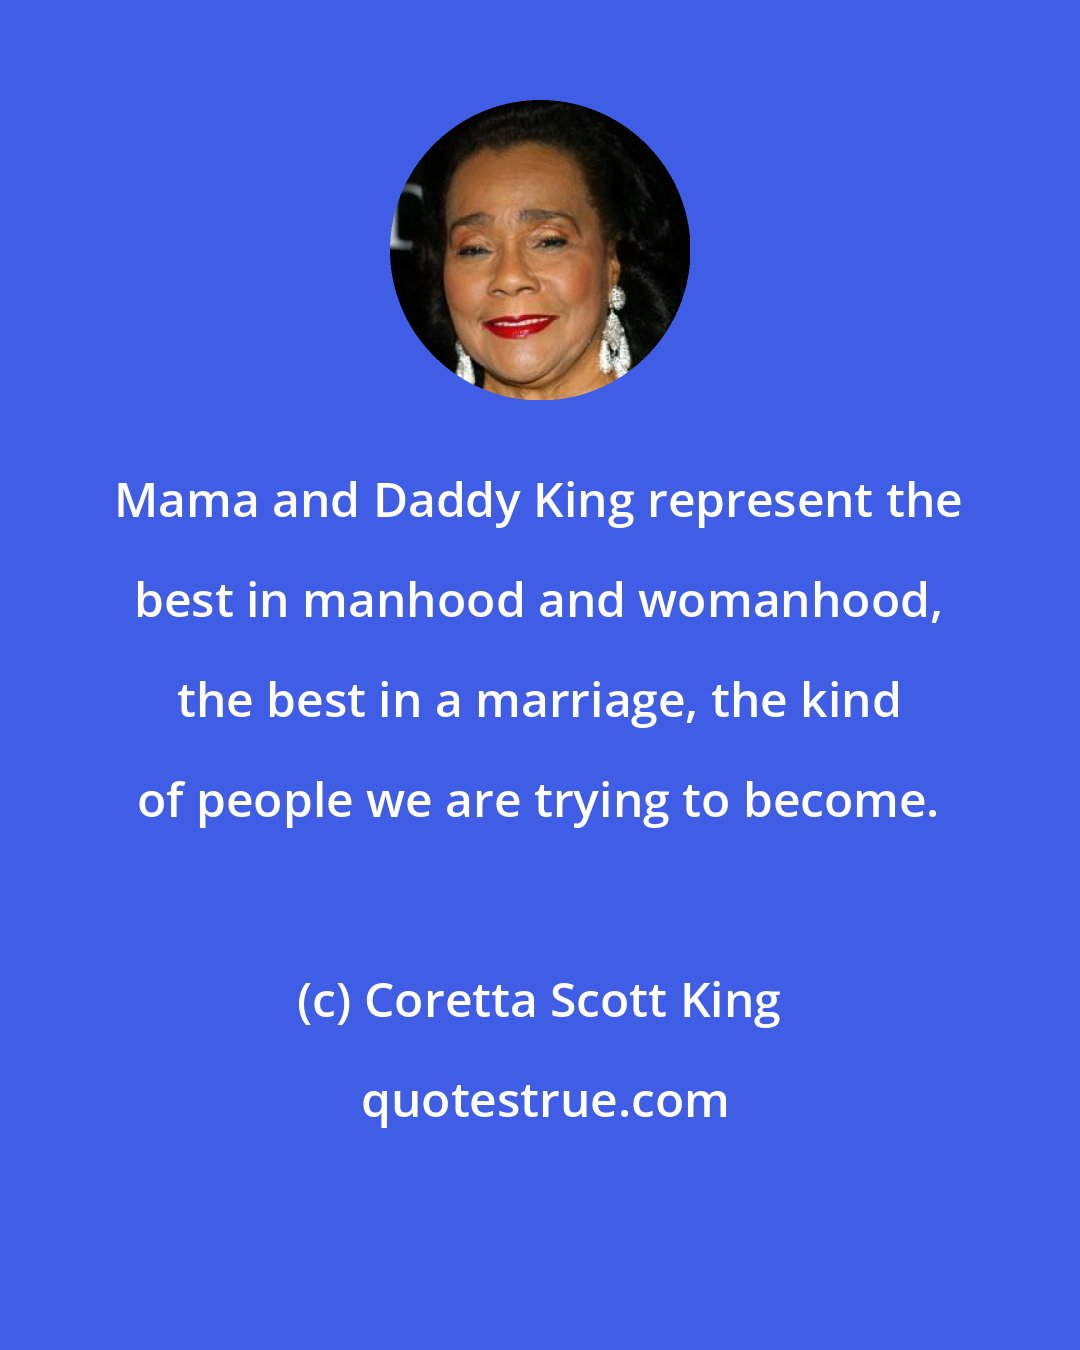 Coretta Scott King: Mama and Daddy King represent the best in manhood and womanhood, the best in a marriage, the kind of people we are trying to become.